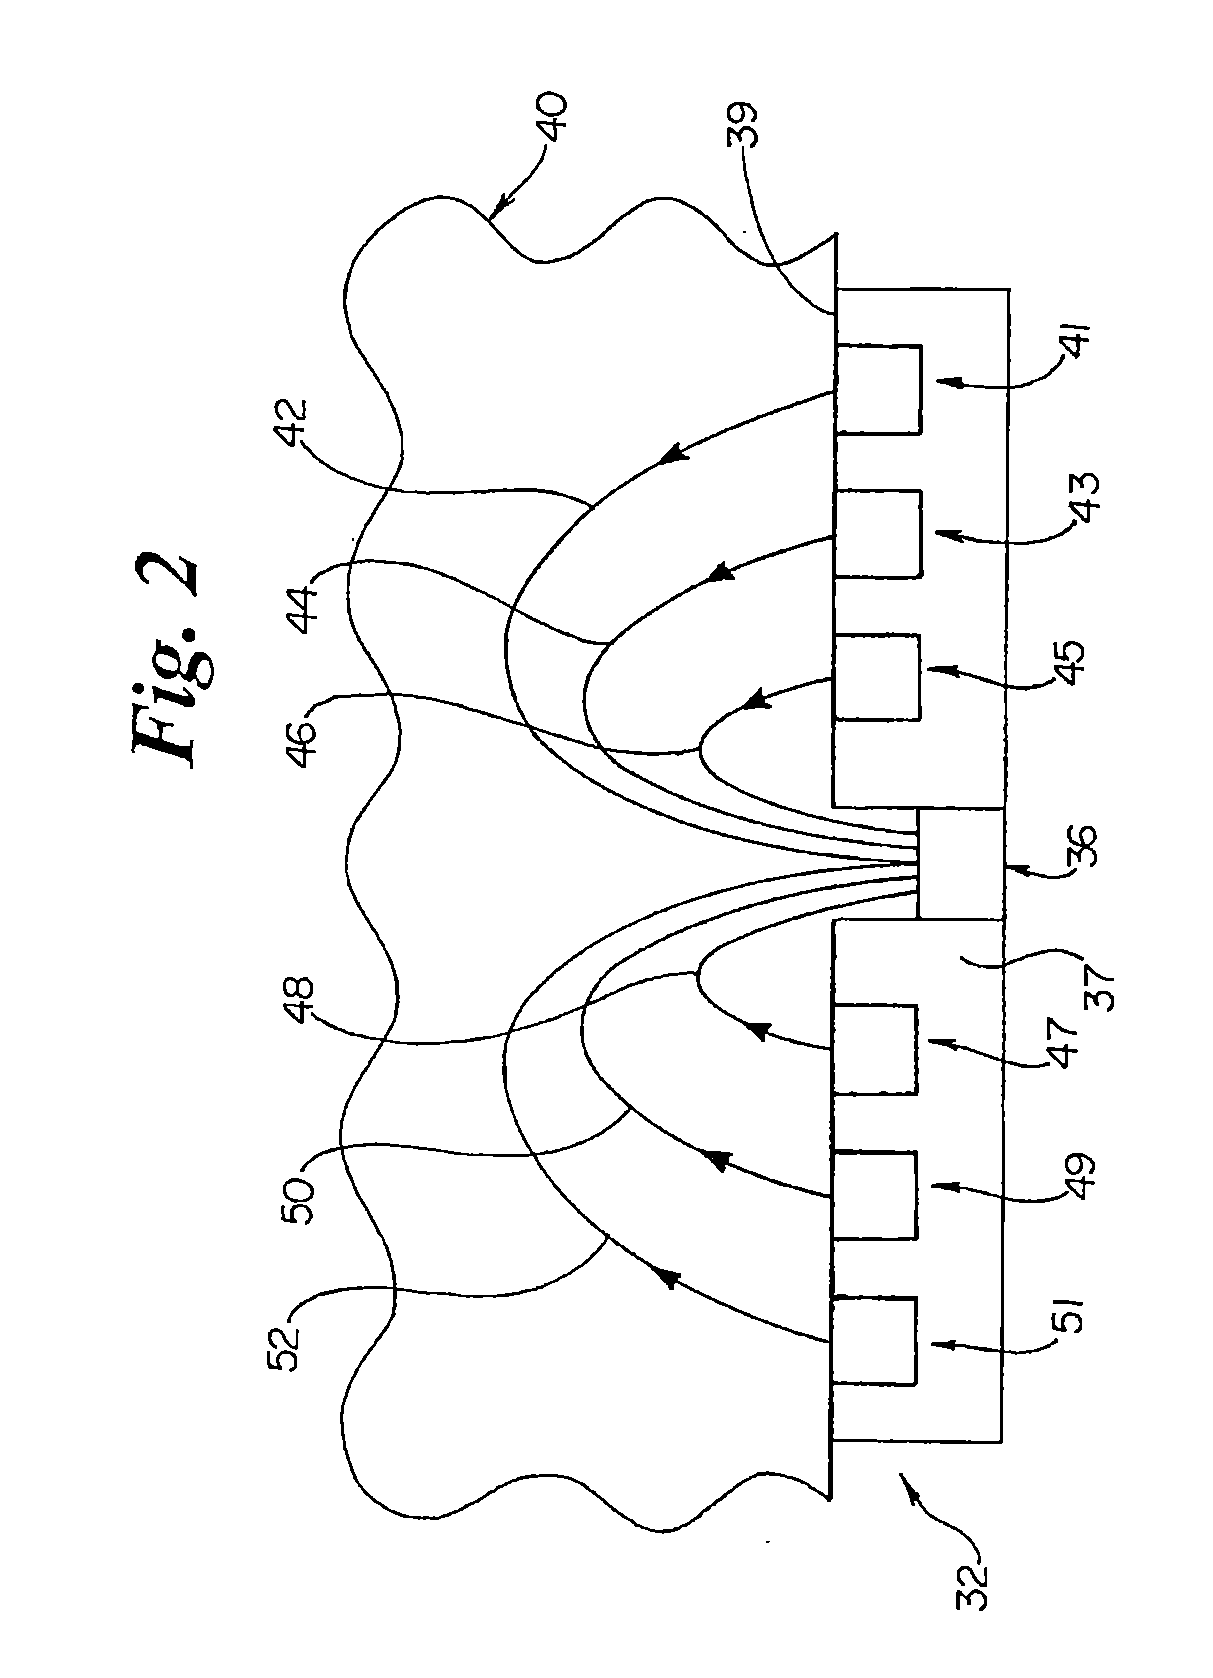 Apparatus and method of biometric determination using specialized optical spectroscopy systems